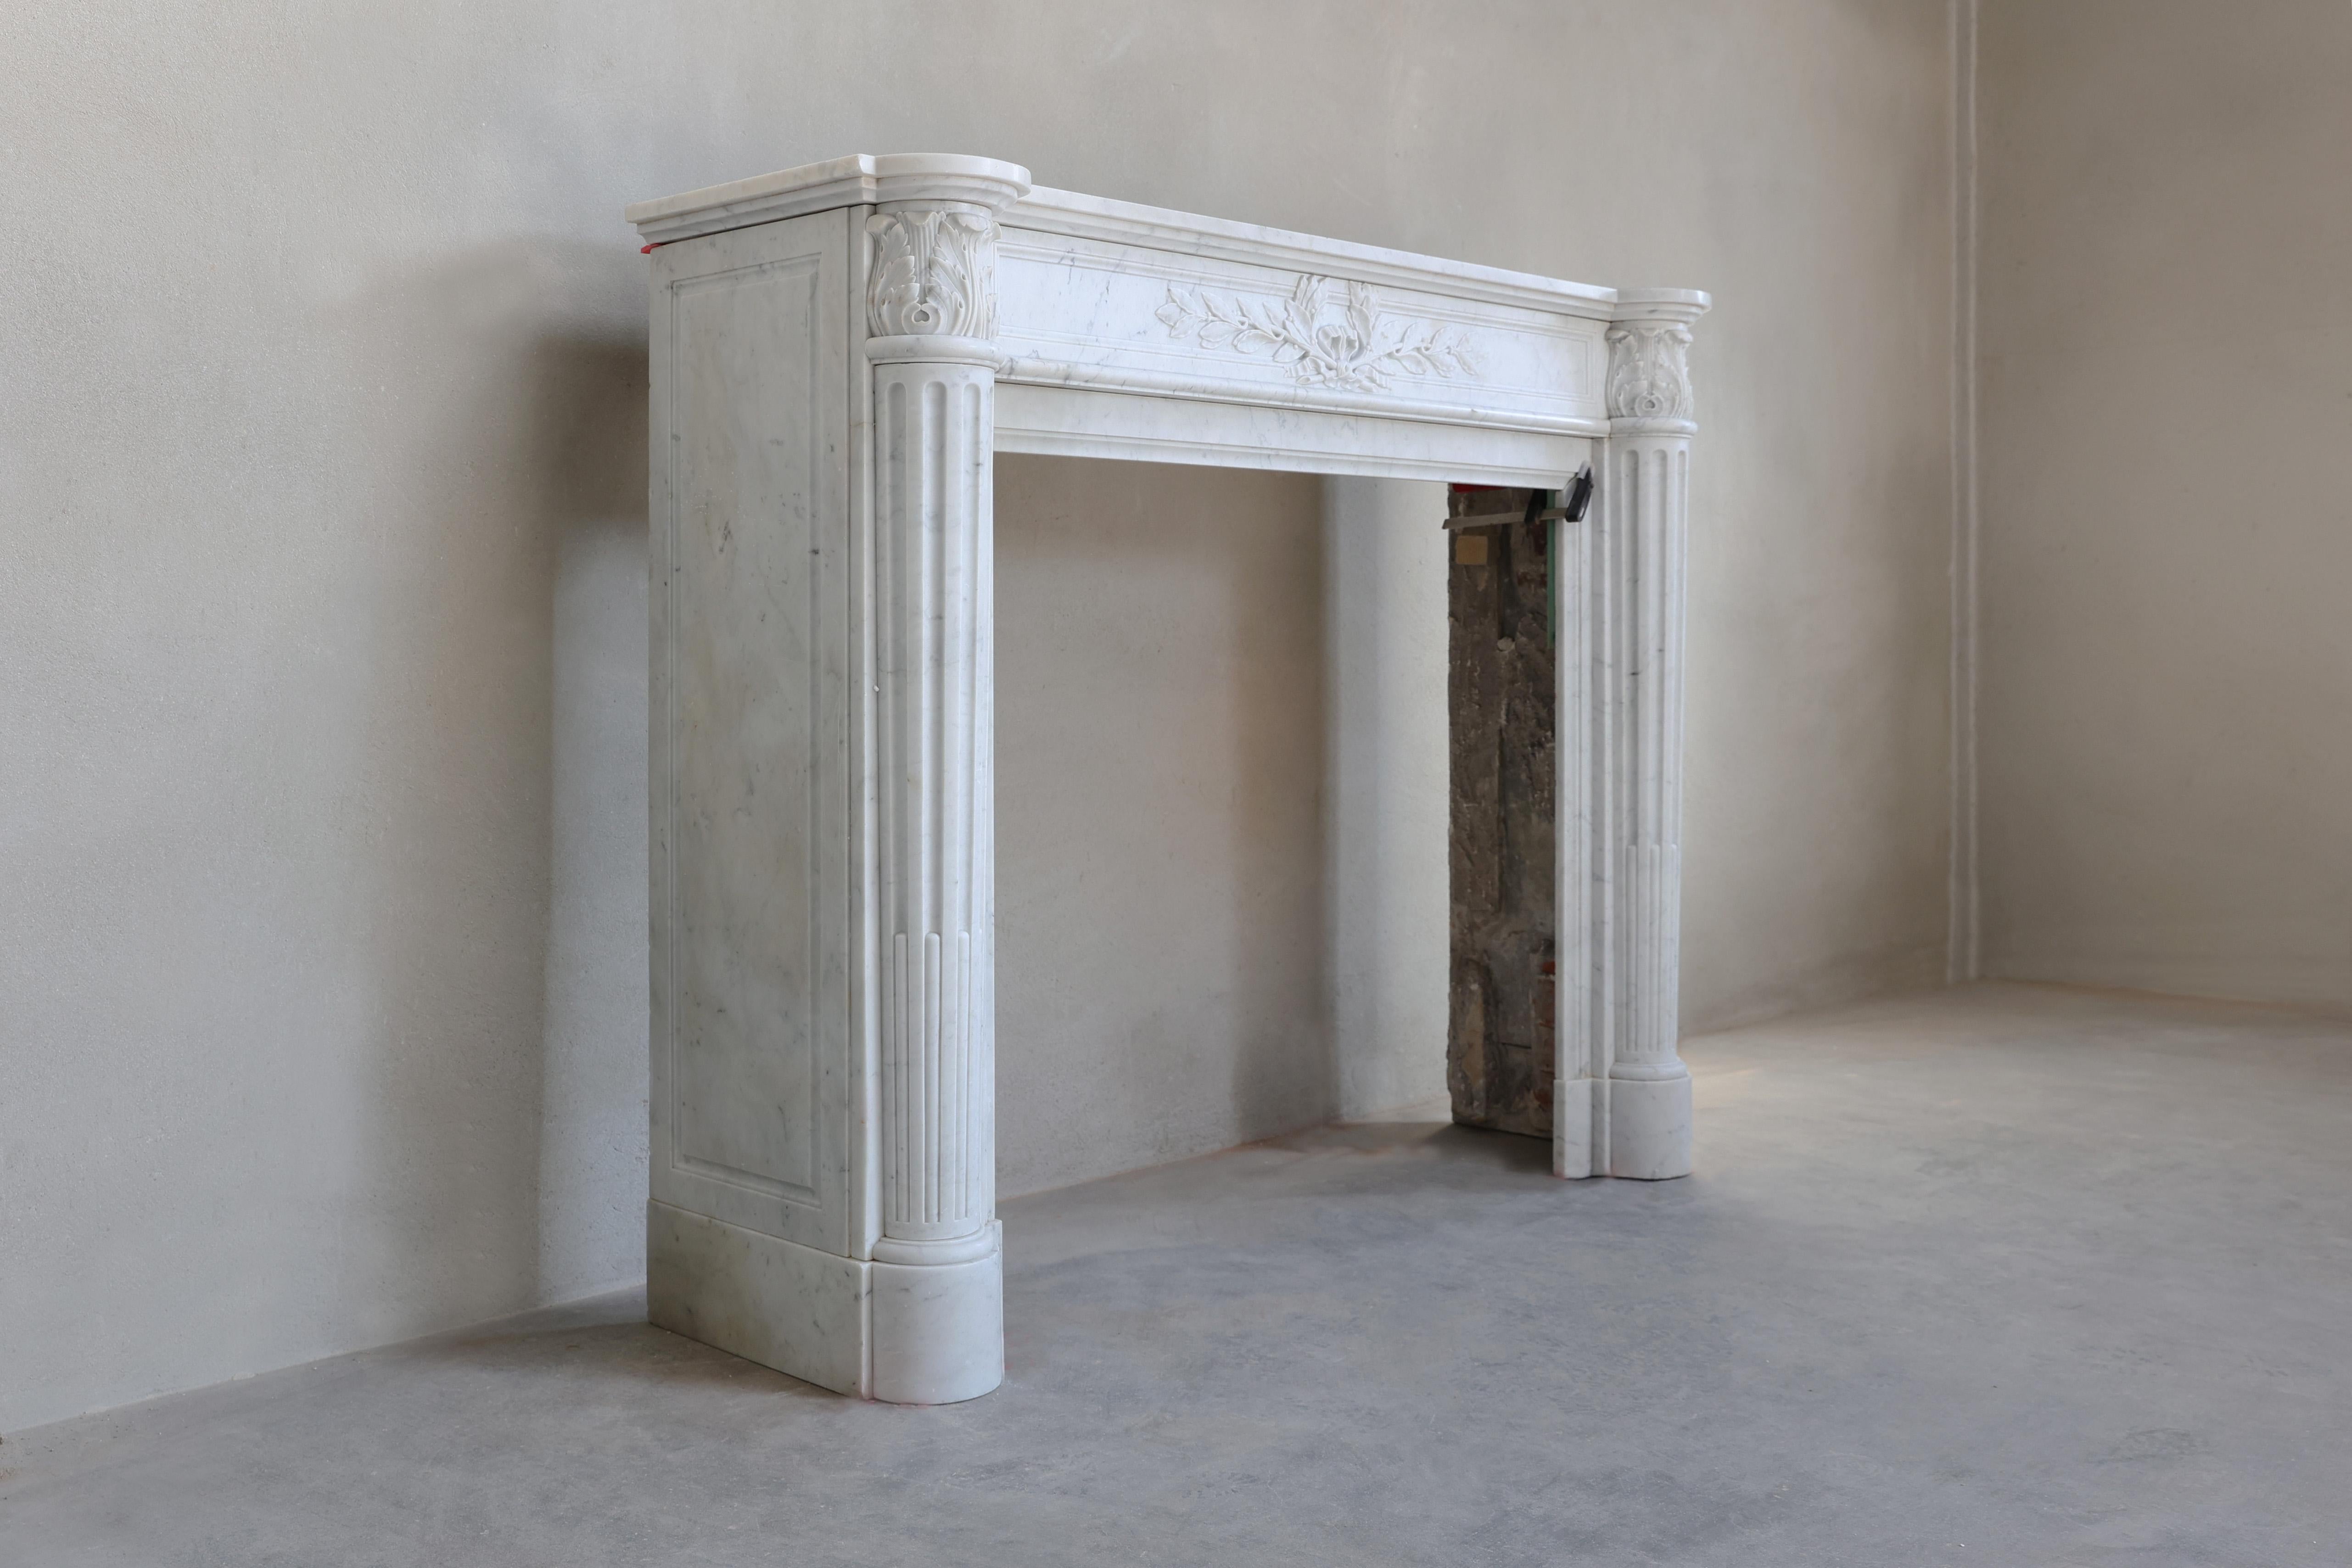 Beautiful antique fireplace carved in Carrara marble. This fireplace is in Louis XVI style and dates from the mid-19th century! The middle part is beautifully decorated with a laurel wreath and on the legs you can see the acanthus leaves. The legs